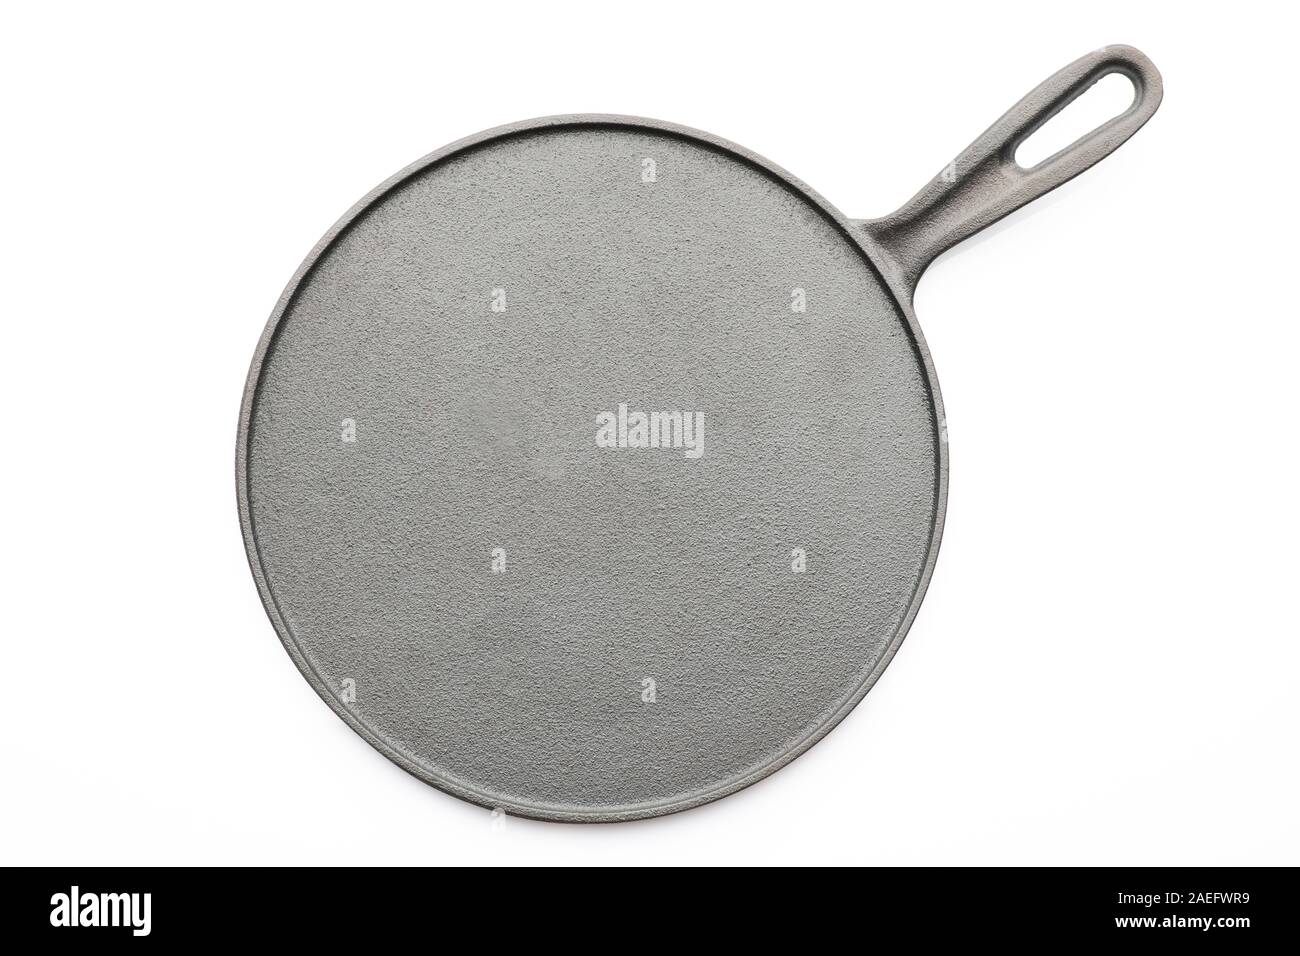 Top View of Seasoned Cast Iron Pan on White Background Stock Photo